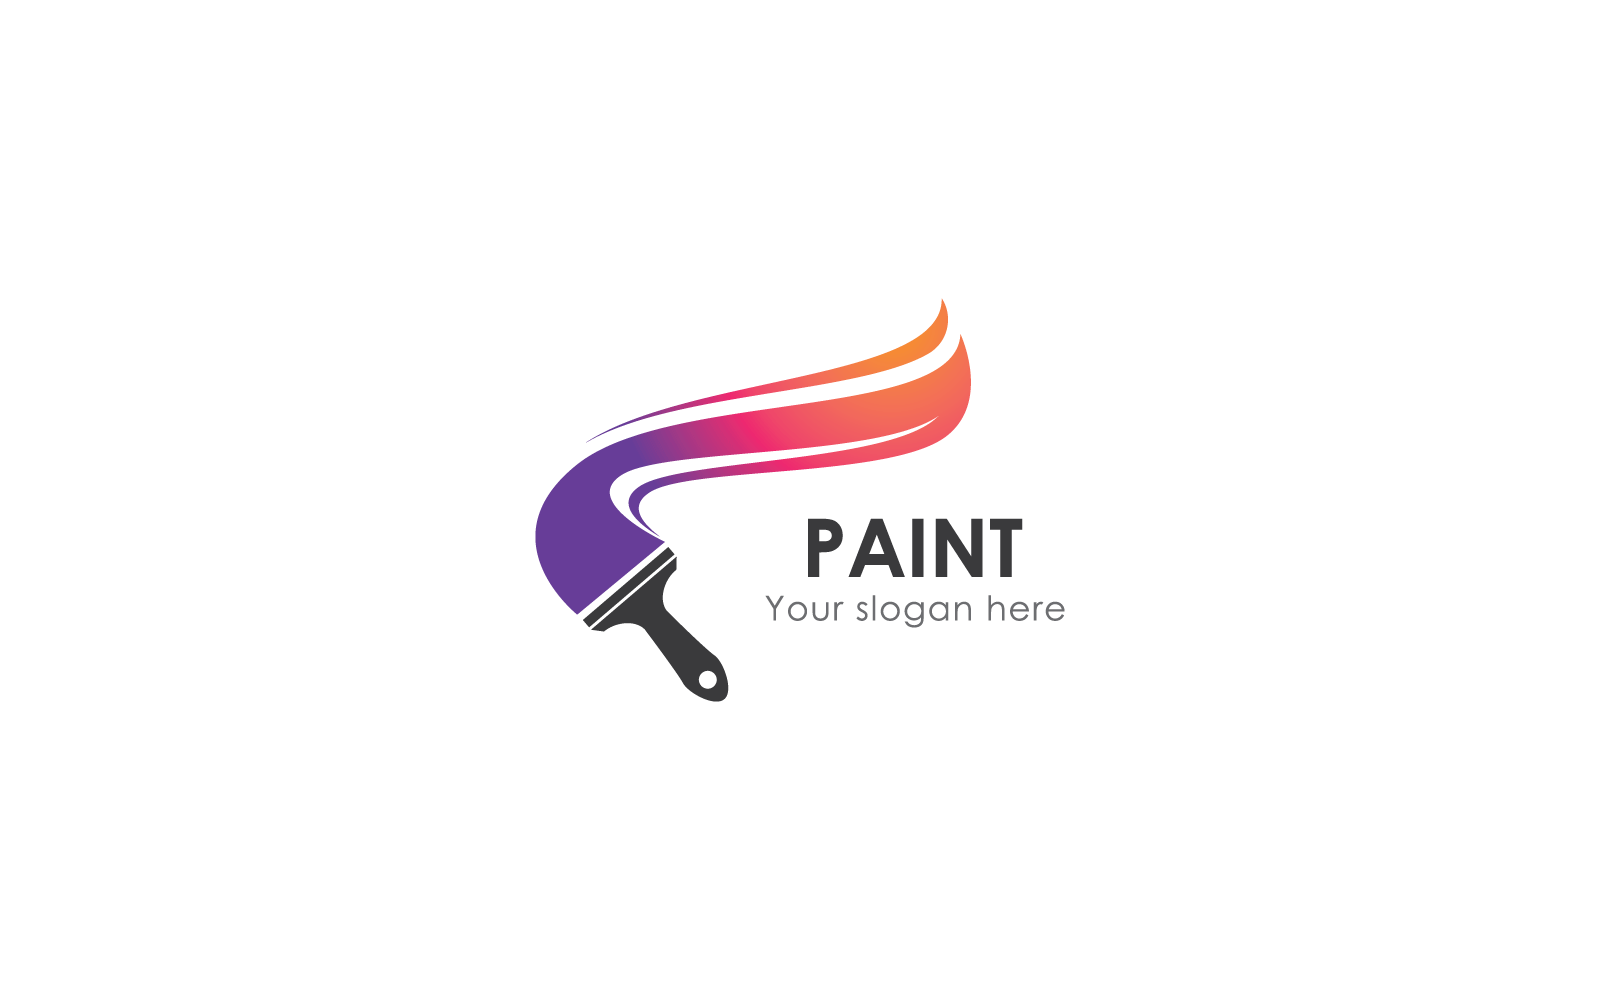 Paint House logo illustration icon business vector template Logo Template